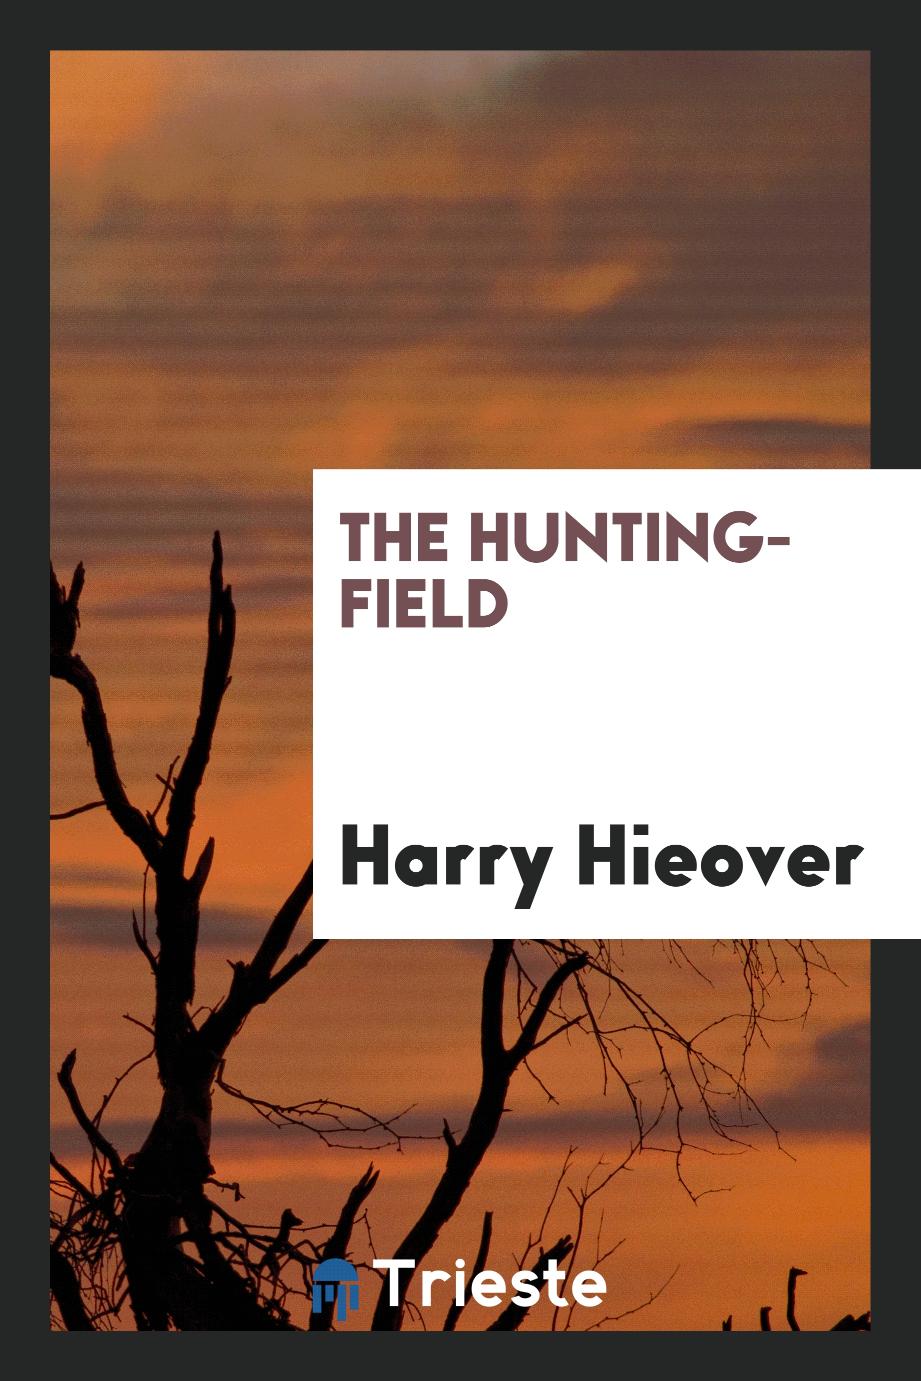 The hunting-field